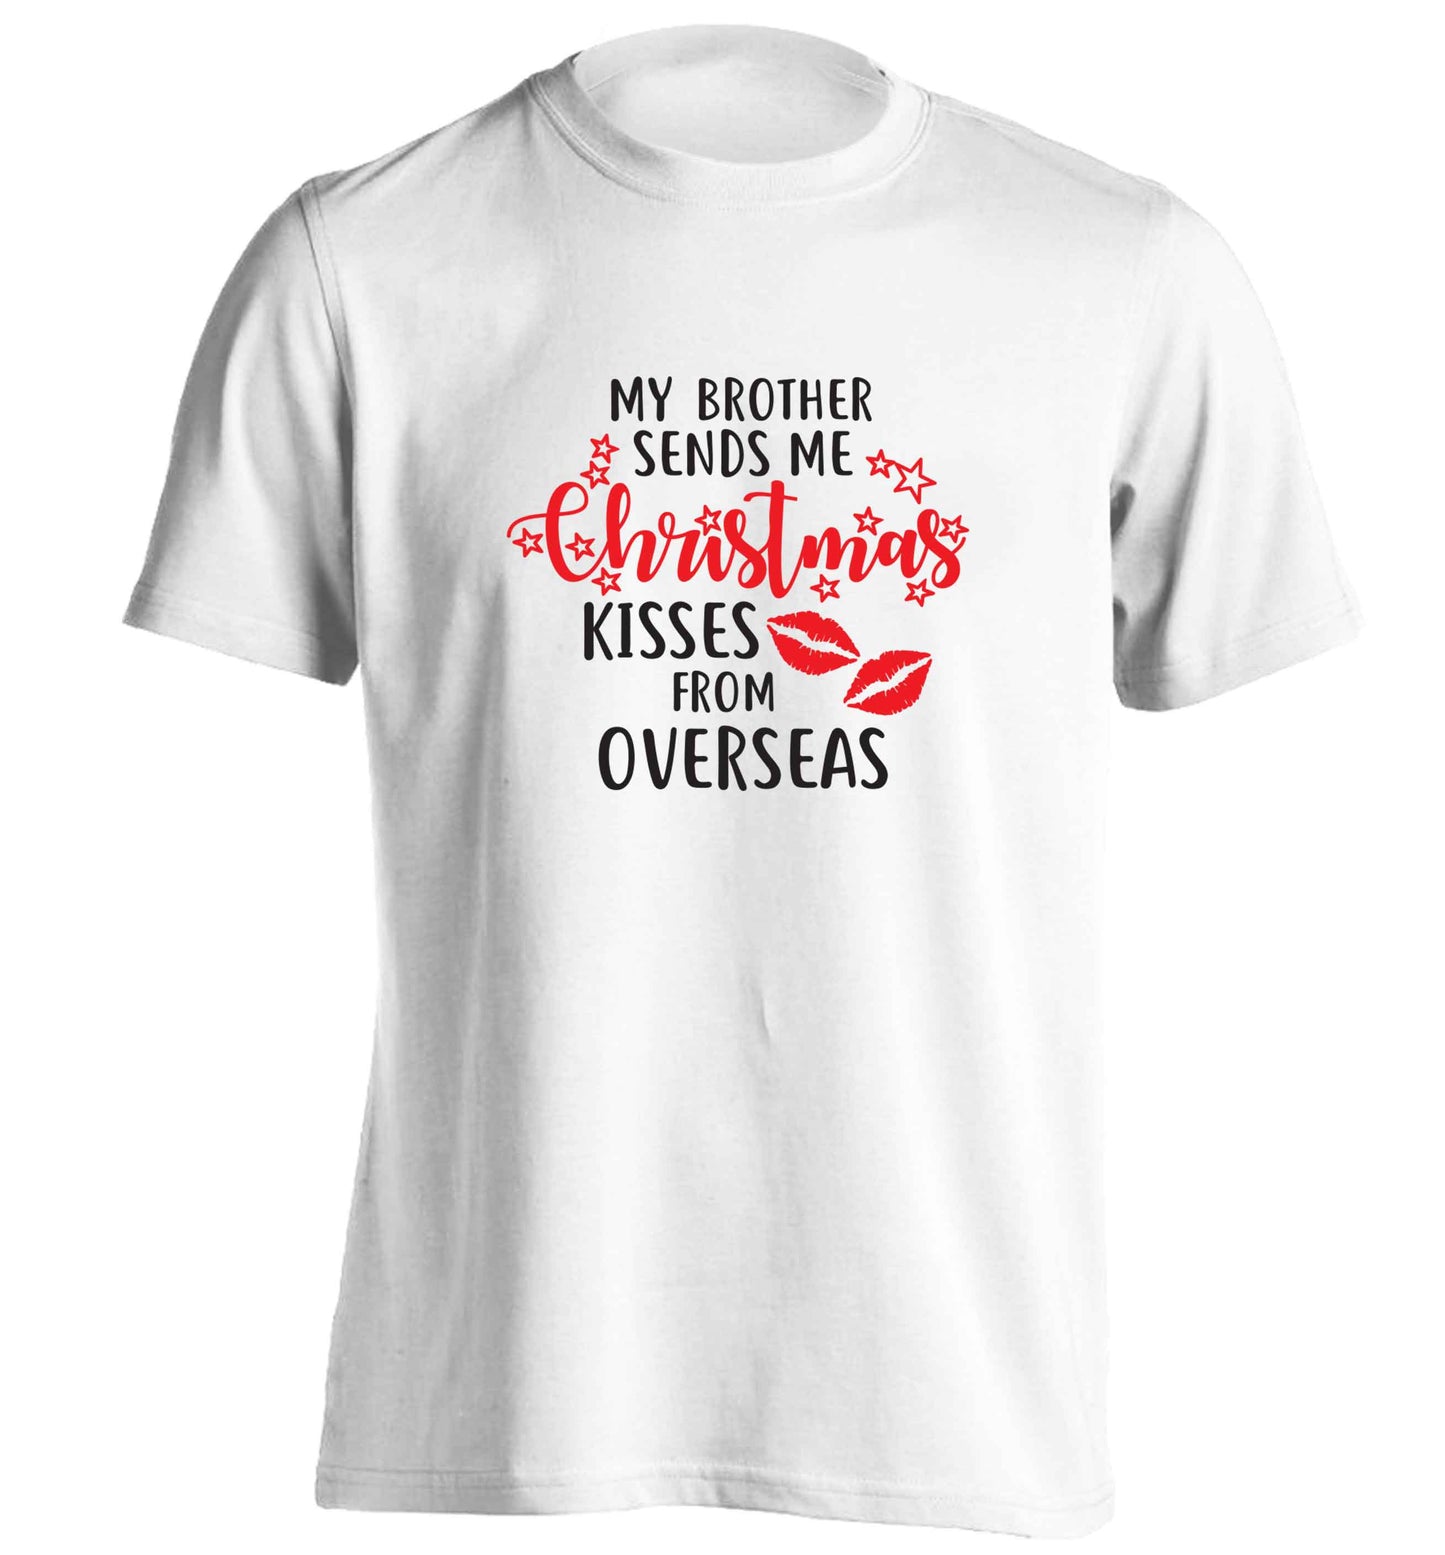 Brother Christmas Kisses Overseas adults unisex white Tshirt 2XL